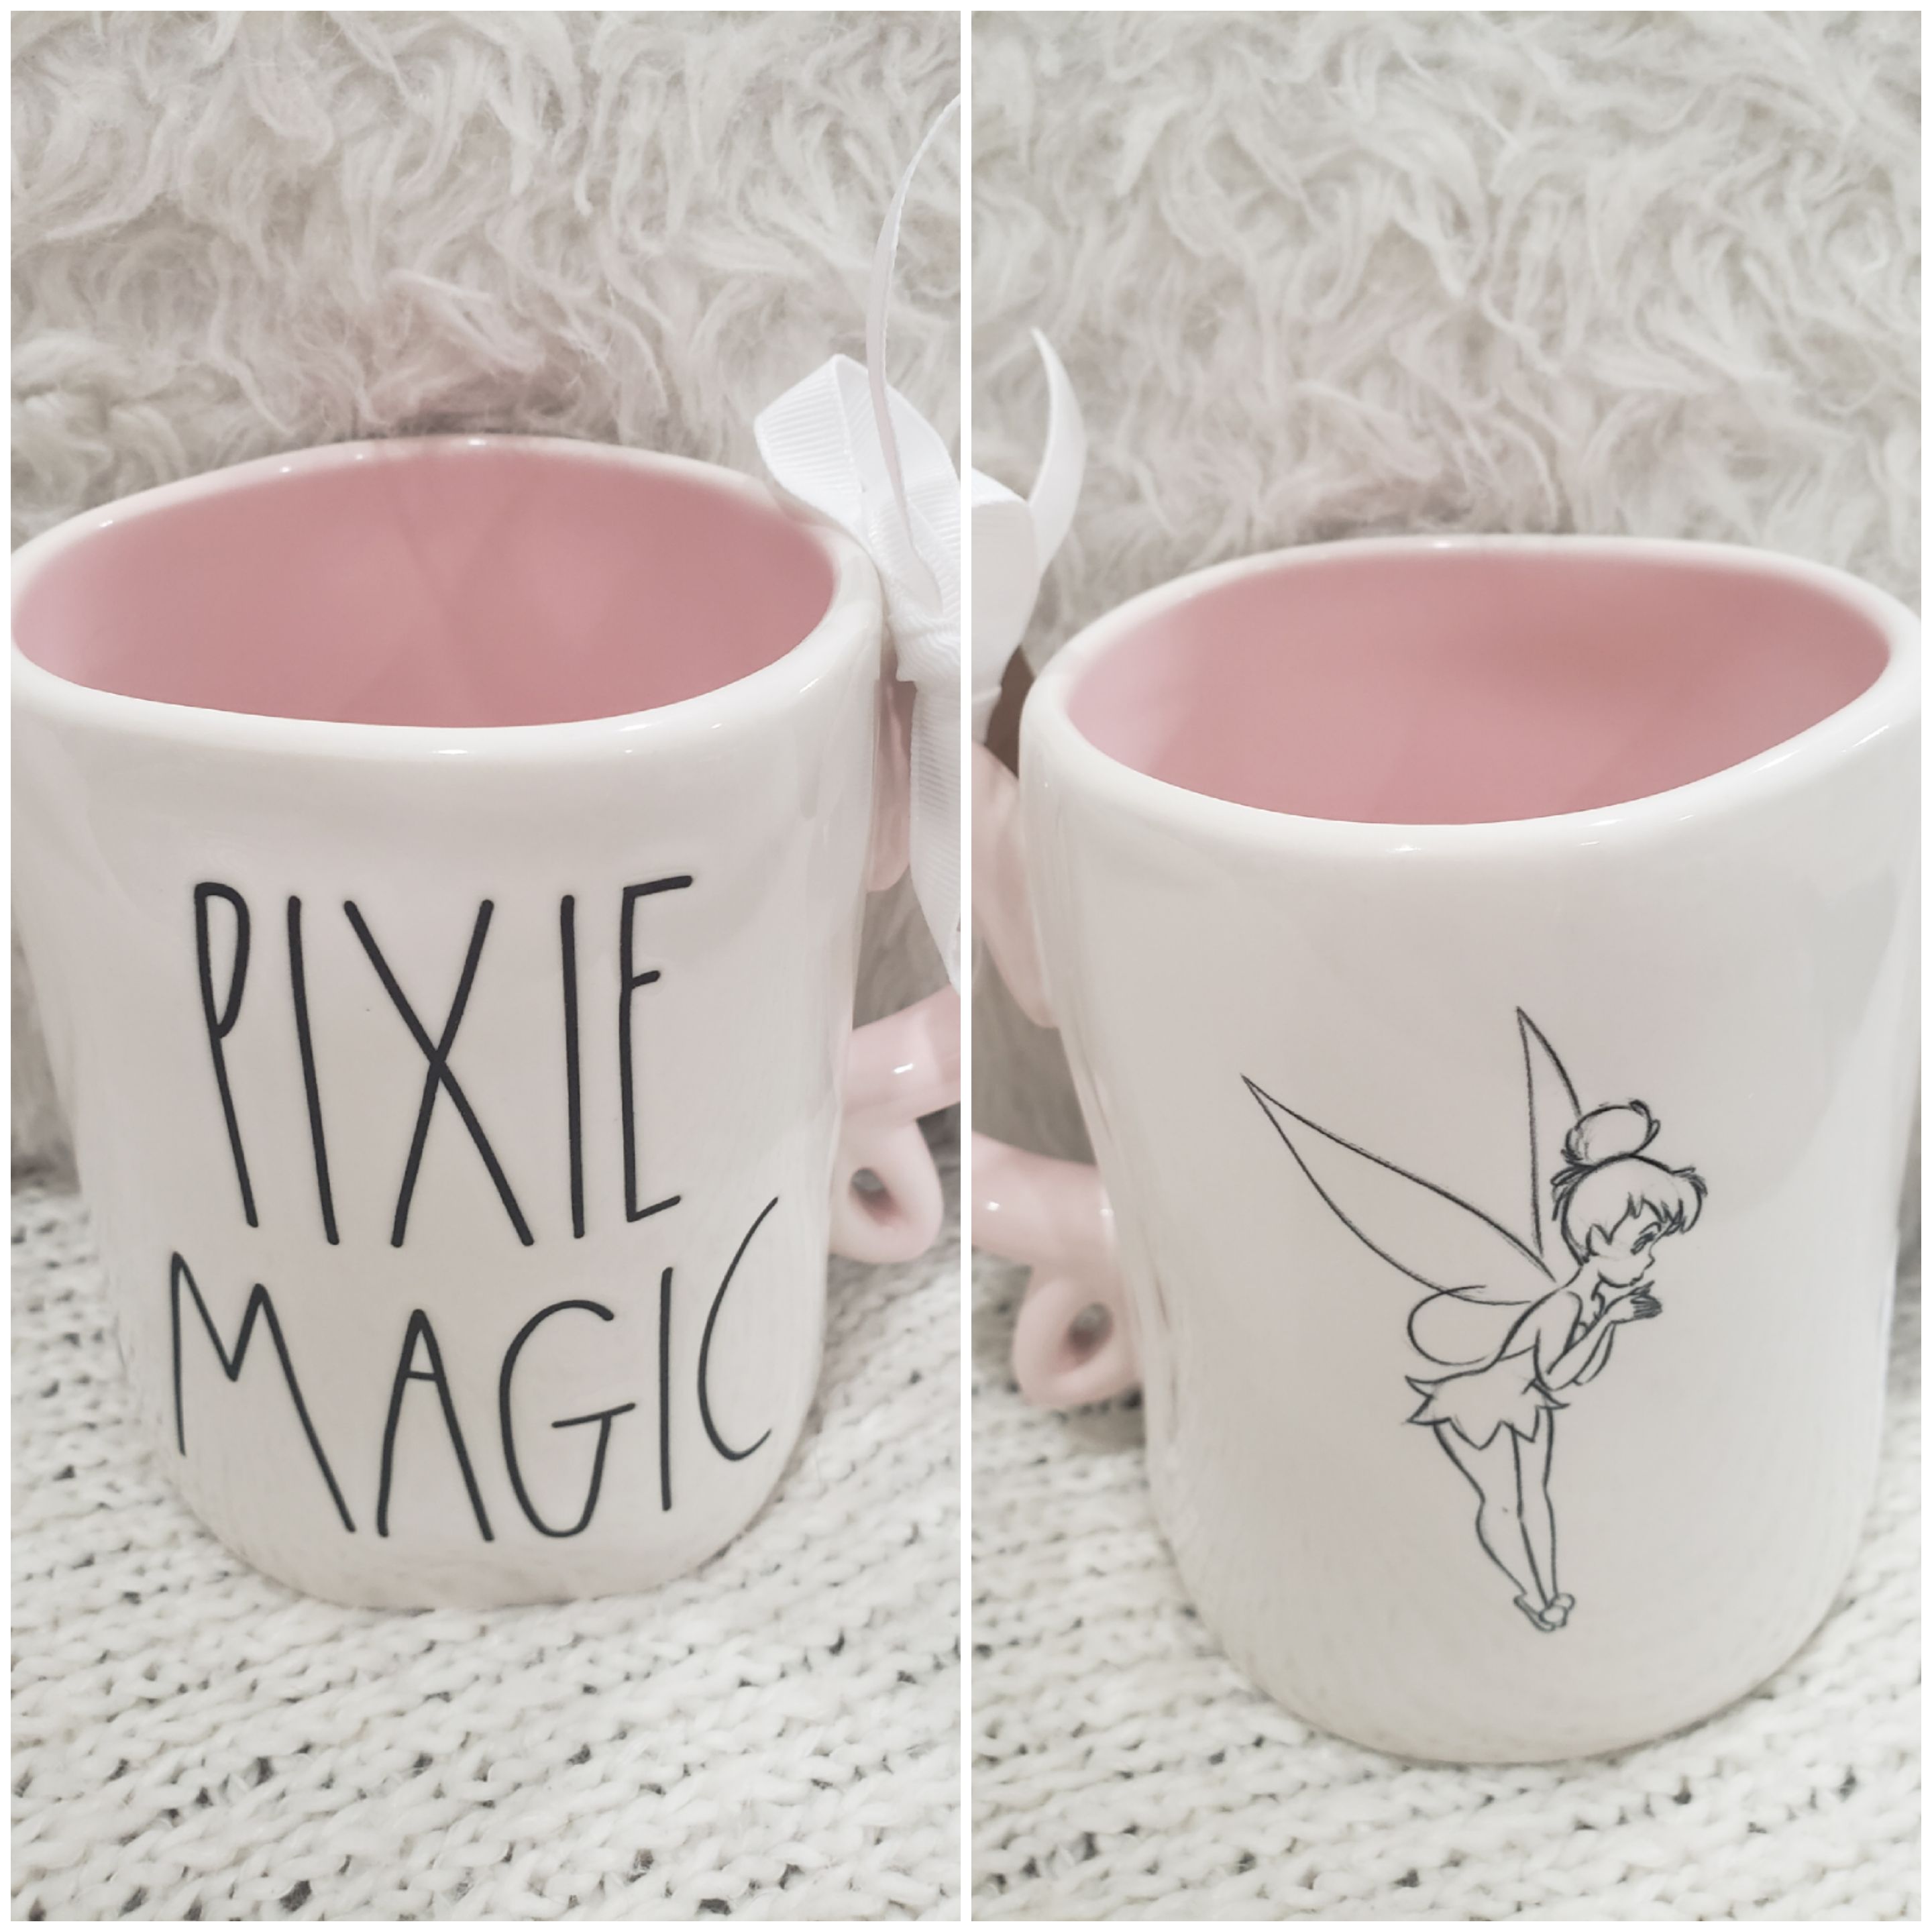 Pixie magic party creations